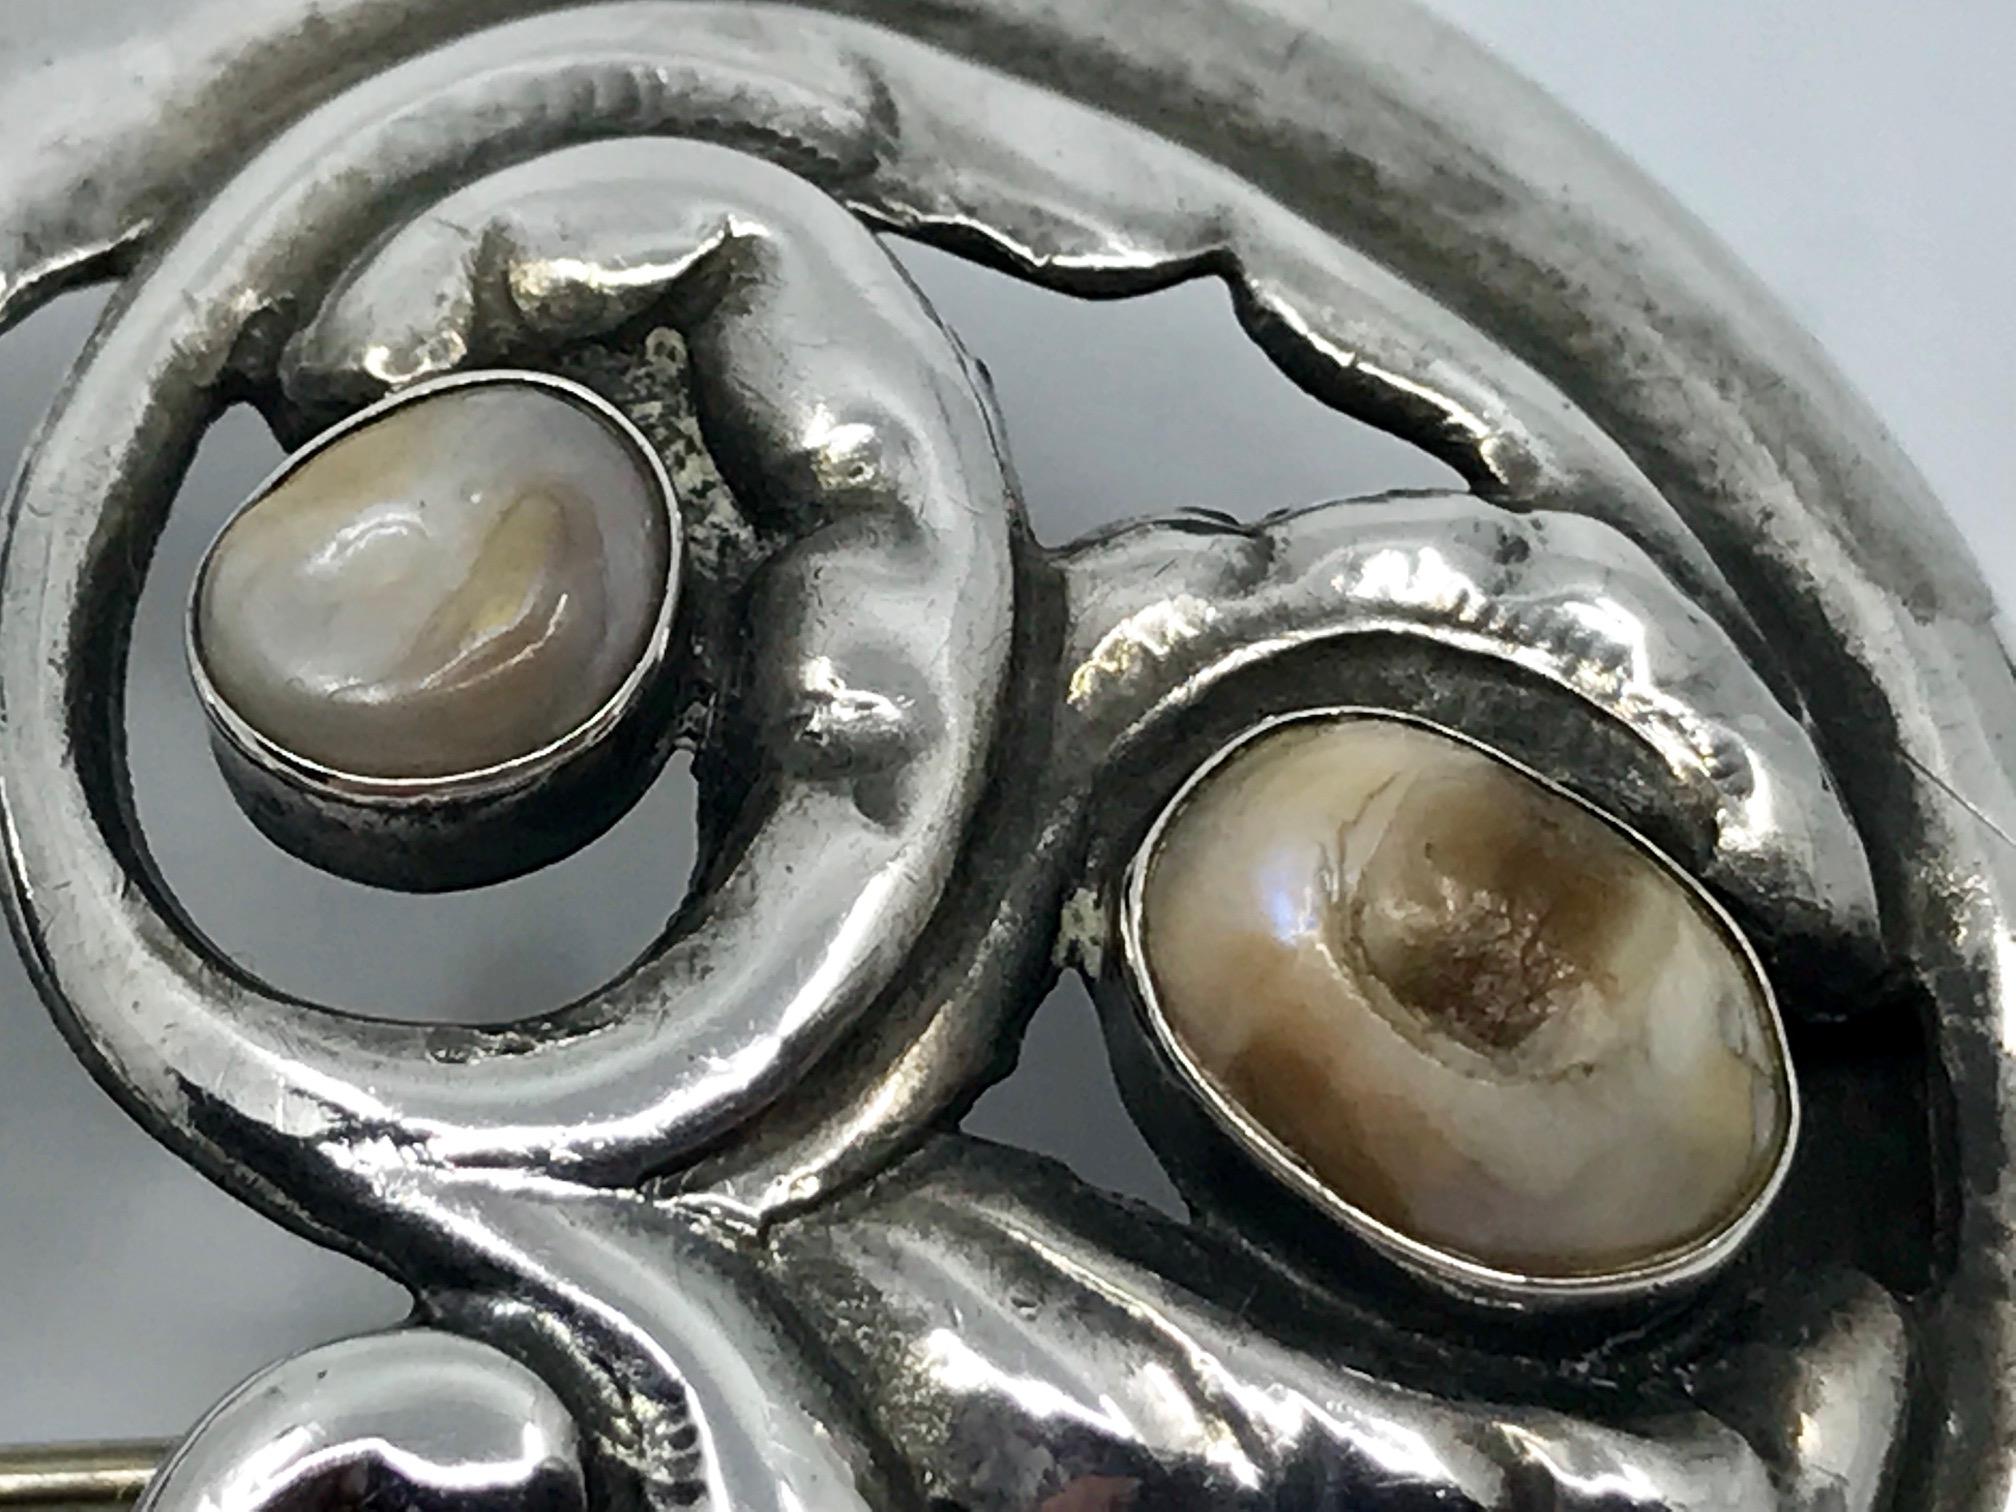 Rare antique silver Georg Jensen brooch set with four natural pearls, design #23 by Georg Jensen.
Measures 2 7/16″ x 1 15/16″ (6.1cm x 4.9cm).
Marked with the absolute earliest Georg Jensen hallmarks from 1904-1908, 826s.